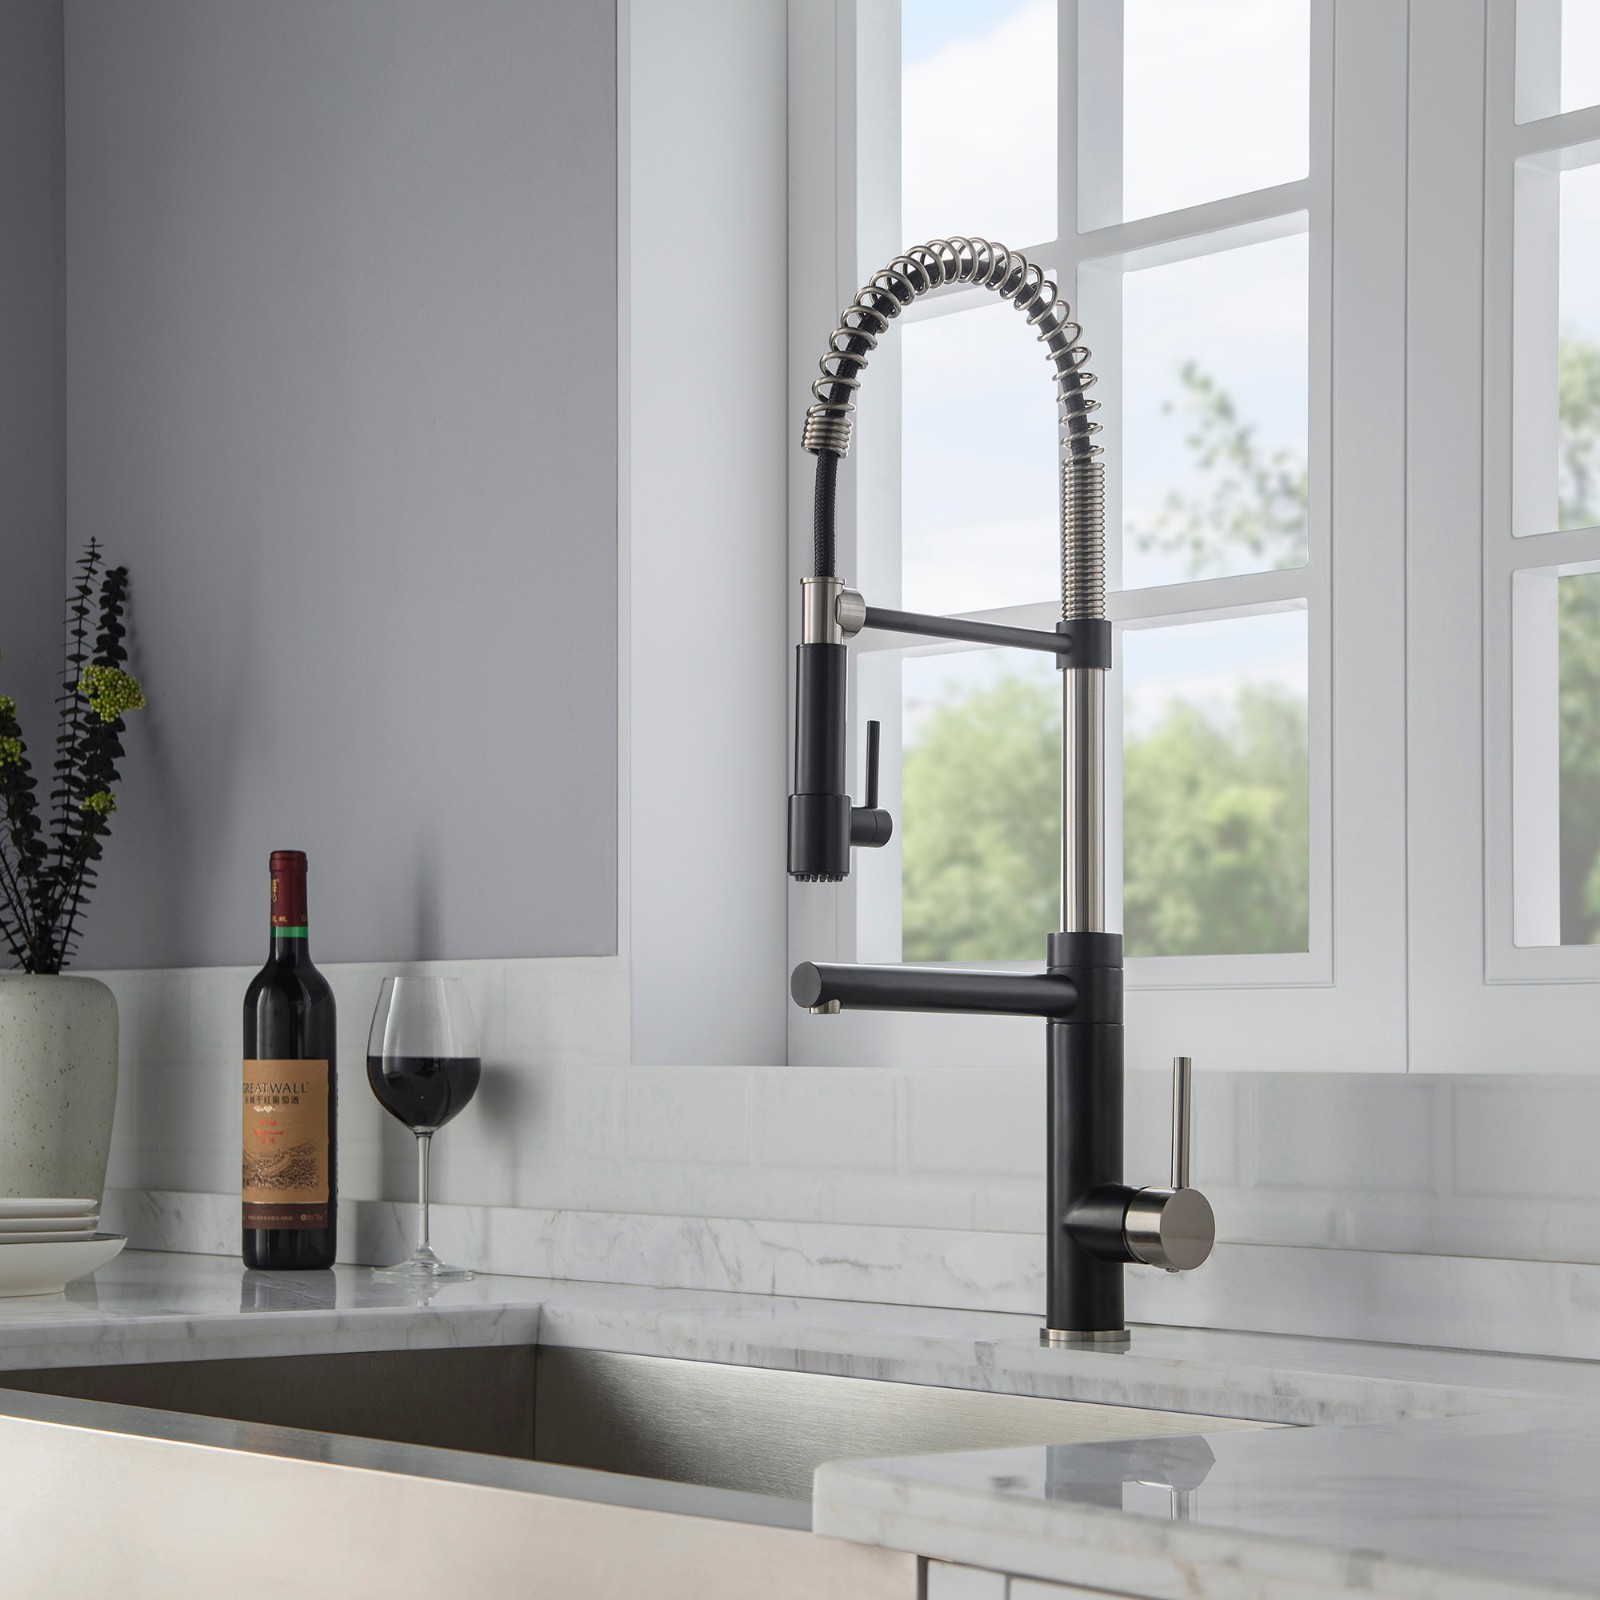  WOODBRIDGE WK060501BL Stainless Steel Single Handle Pre-Rinse Pull Down Kitchen Faucet and Pot Filler in Matte Black Finish._5032